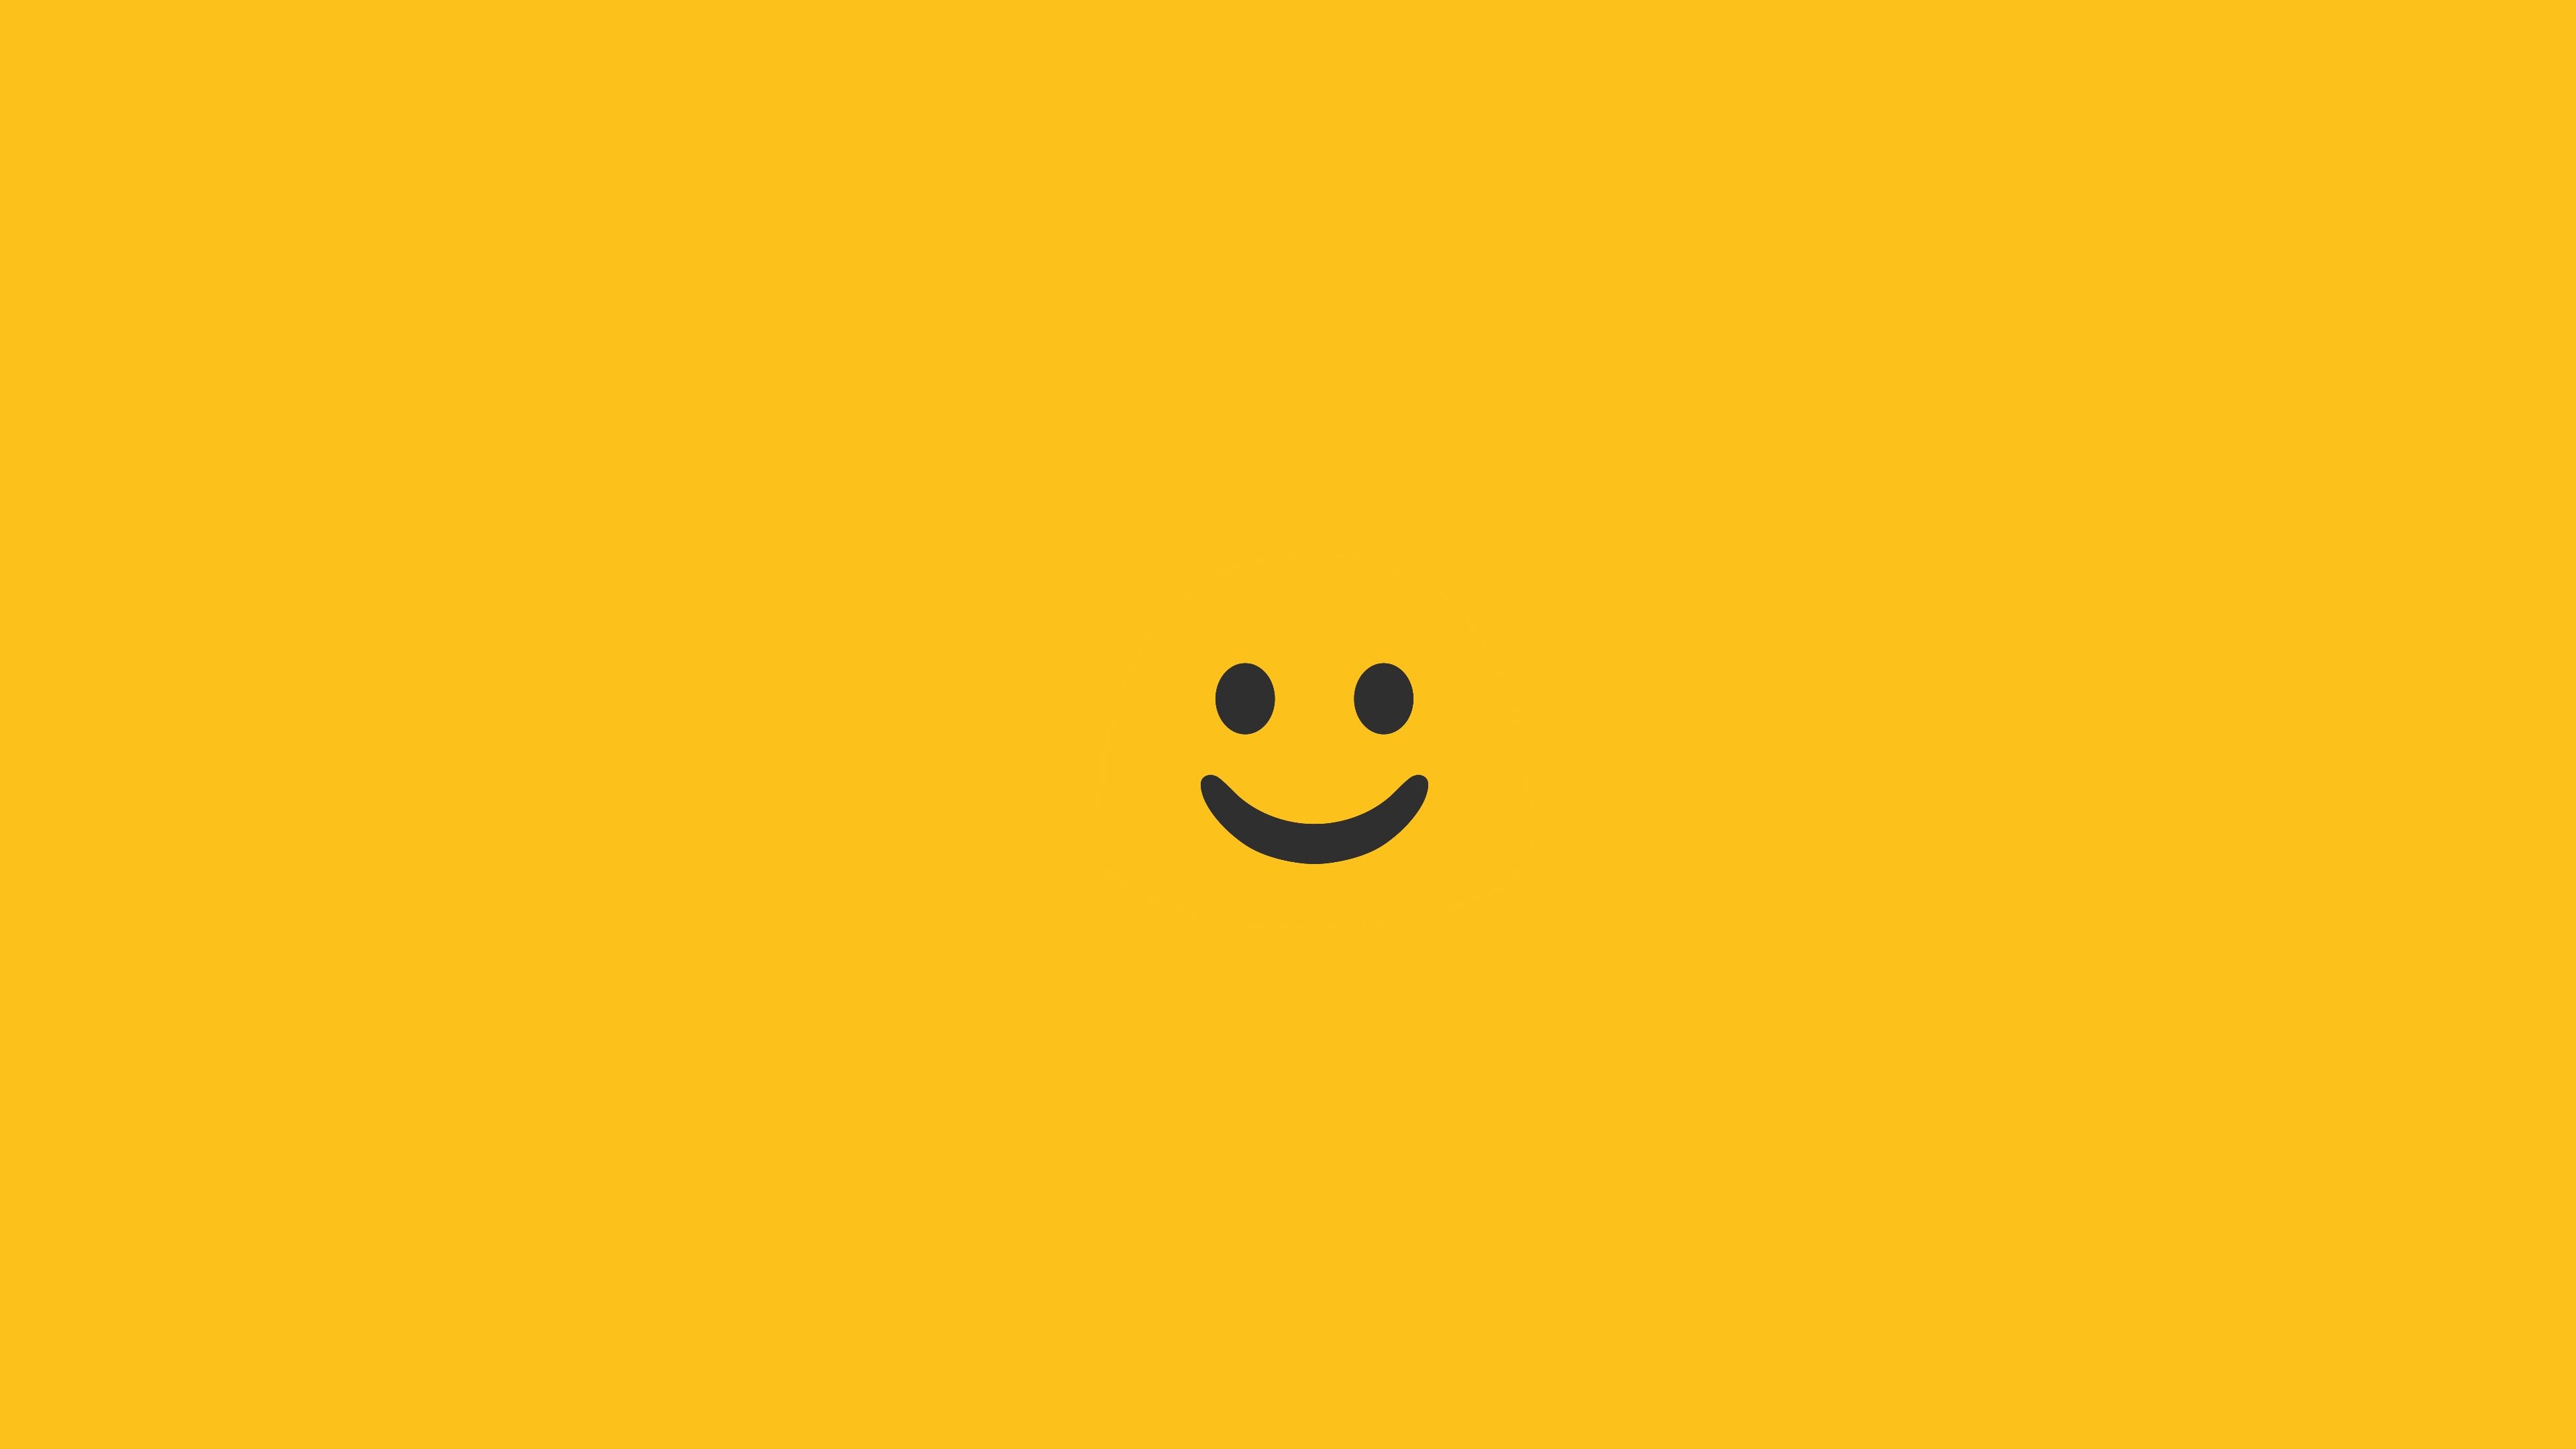 Cute Emoji Live Wallpaper APK for Android - Download